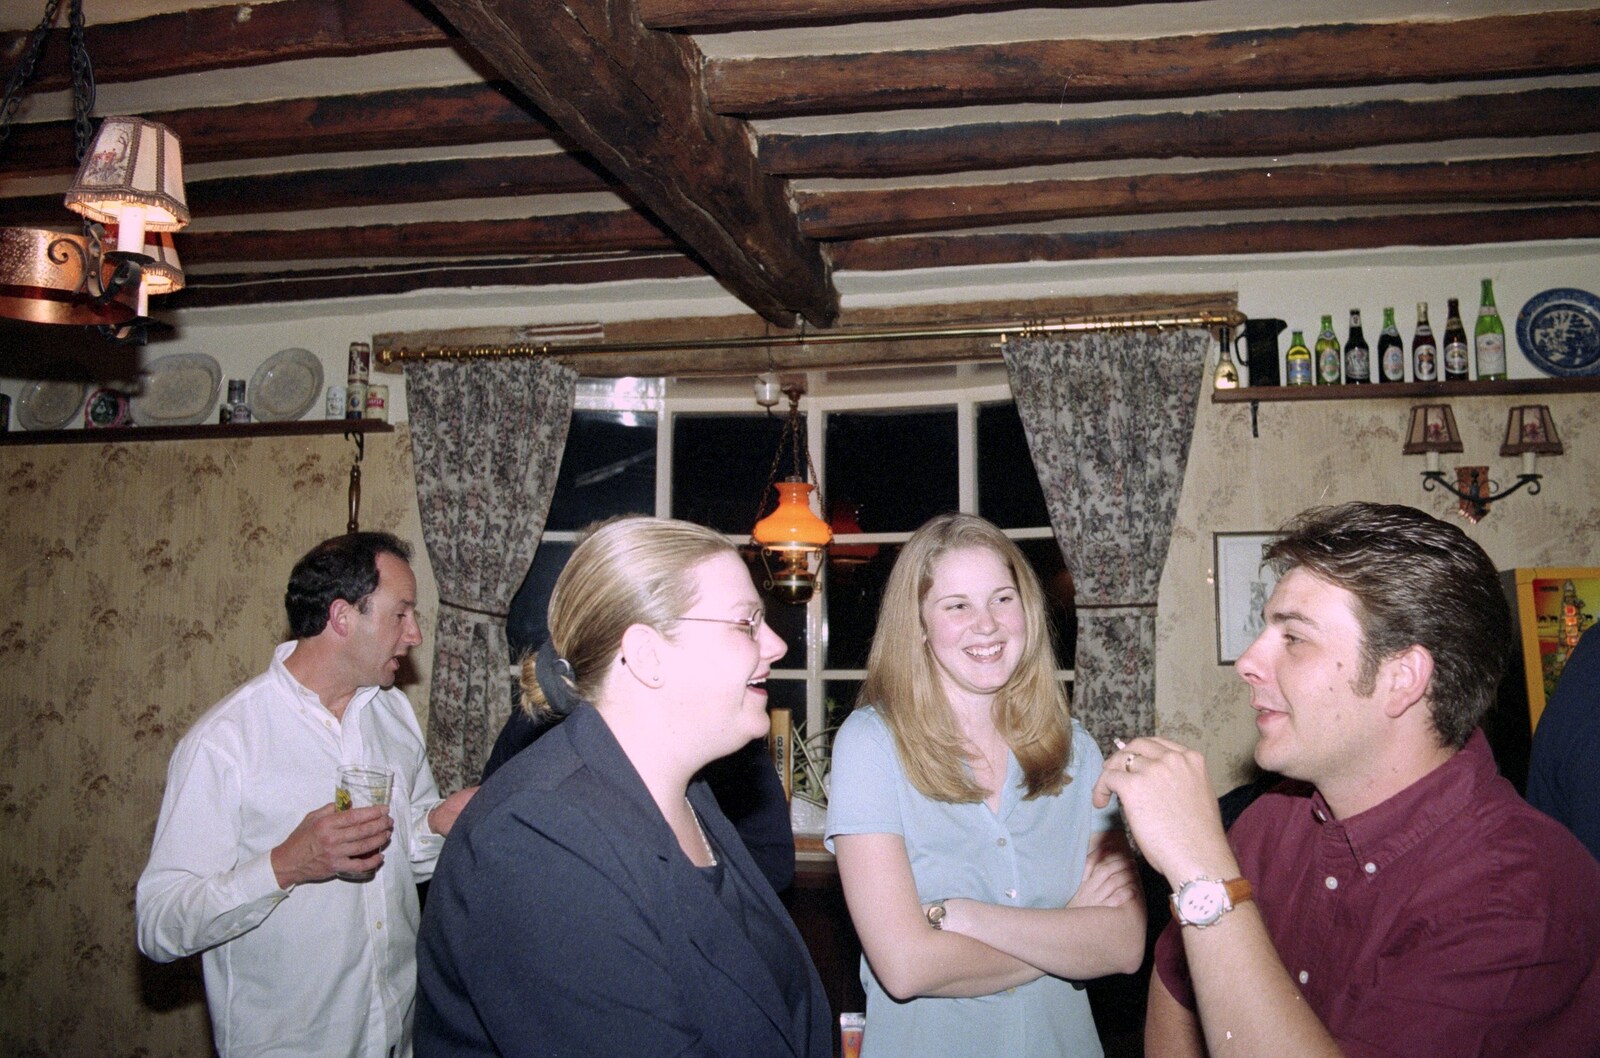 Helen, Lorraine and Neil from Wavy's Thirtieth Birthday, The Swan Inn, Brome, Suffolk - 24th May 2000